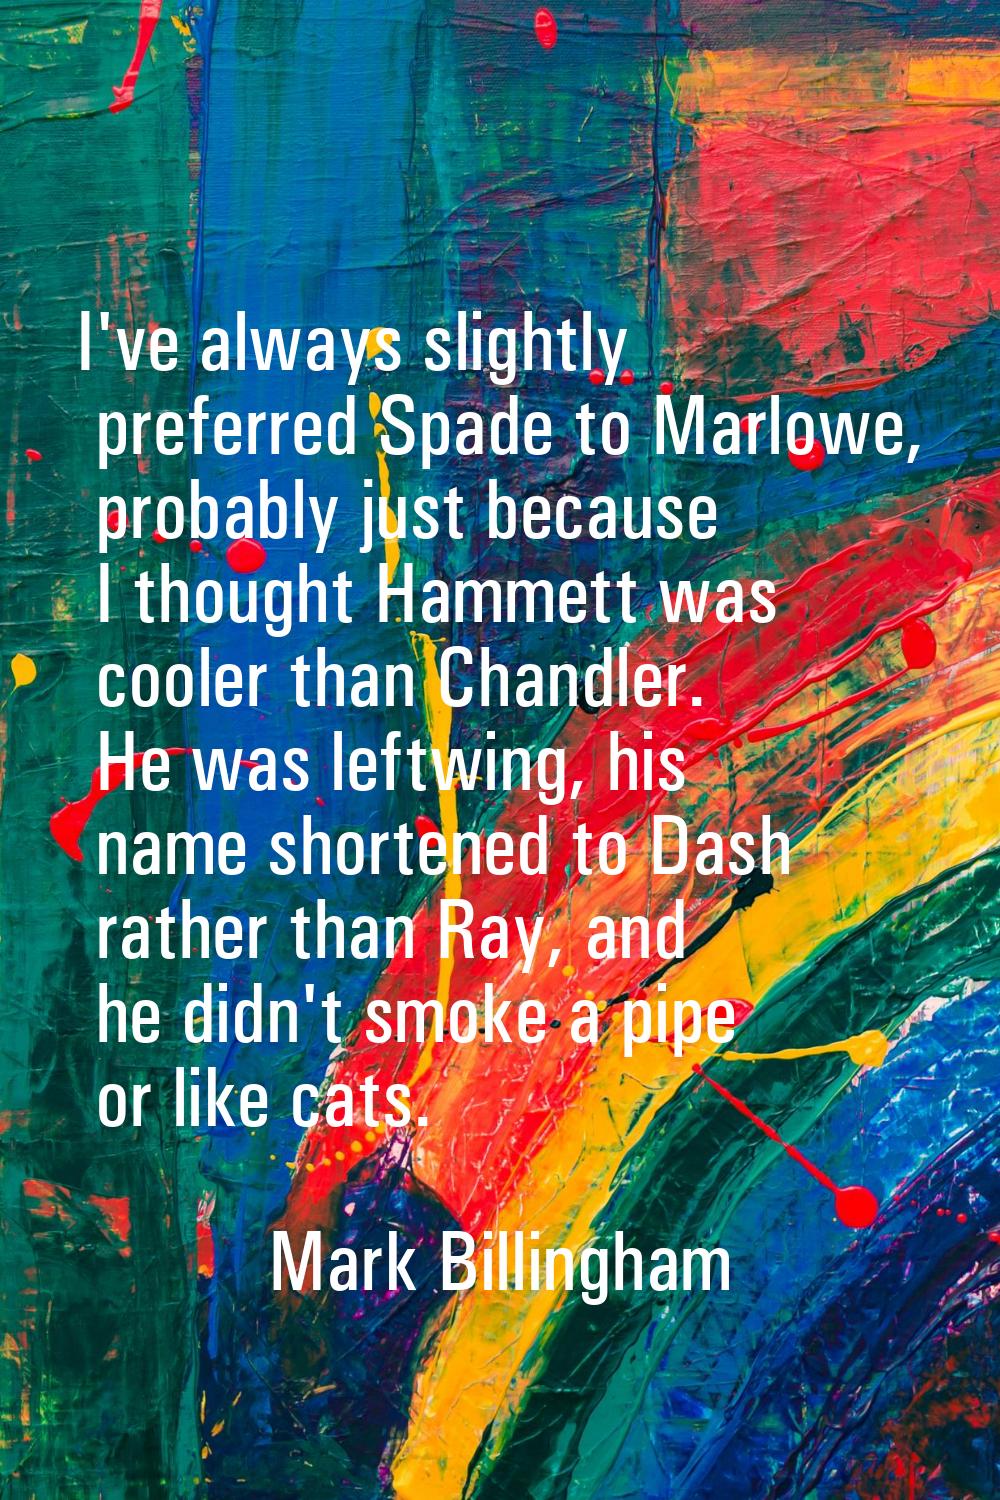 I've always slightly preferred Spade to Marlowe, probably just because I thought Hammett was cooler